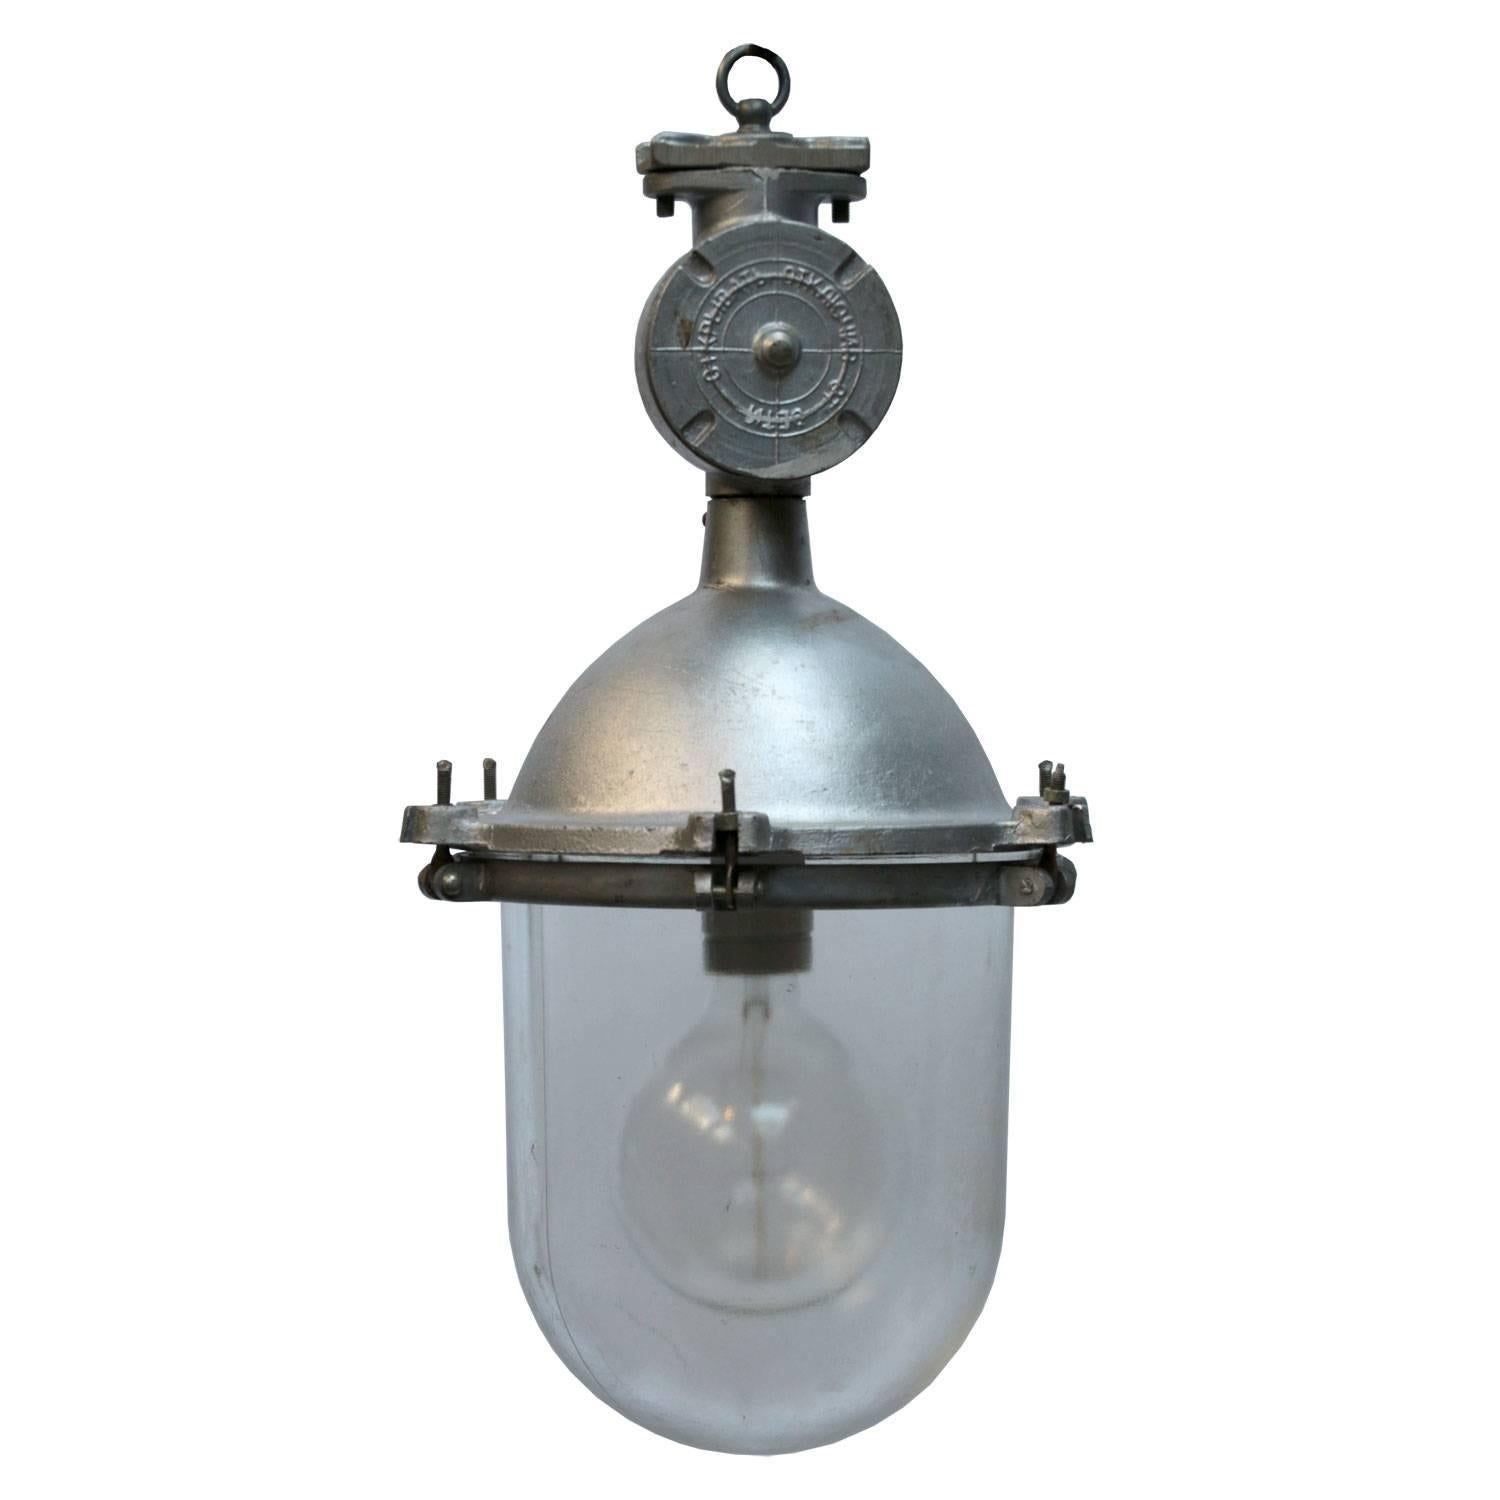 Industrial hanging lamp. silver grey cast aluminium.
Clear glass.

Weight: 10.0 kg / 22 lb

Priced per individual item. All lamps have been made suitable by international standards for incandescent light bulbs, energy-efficient and LED bulbs.